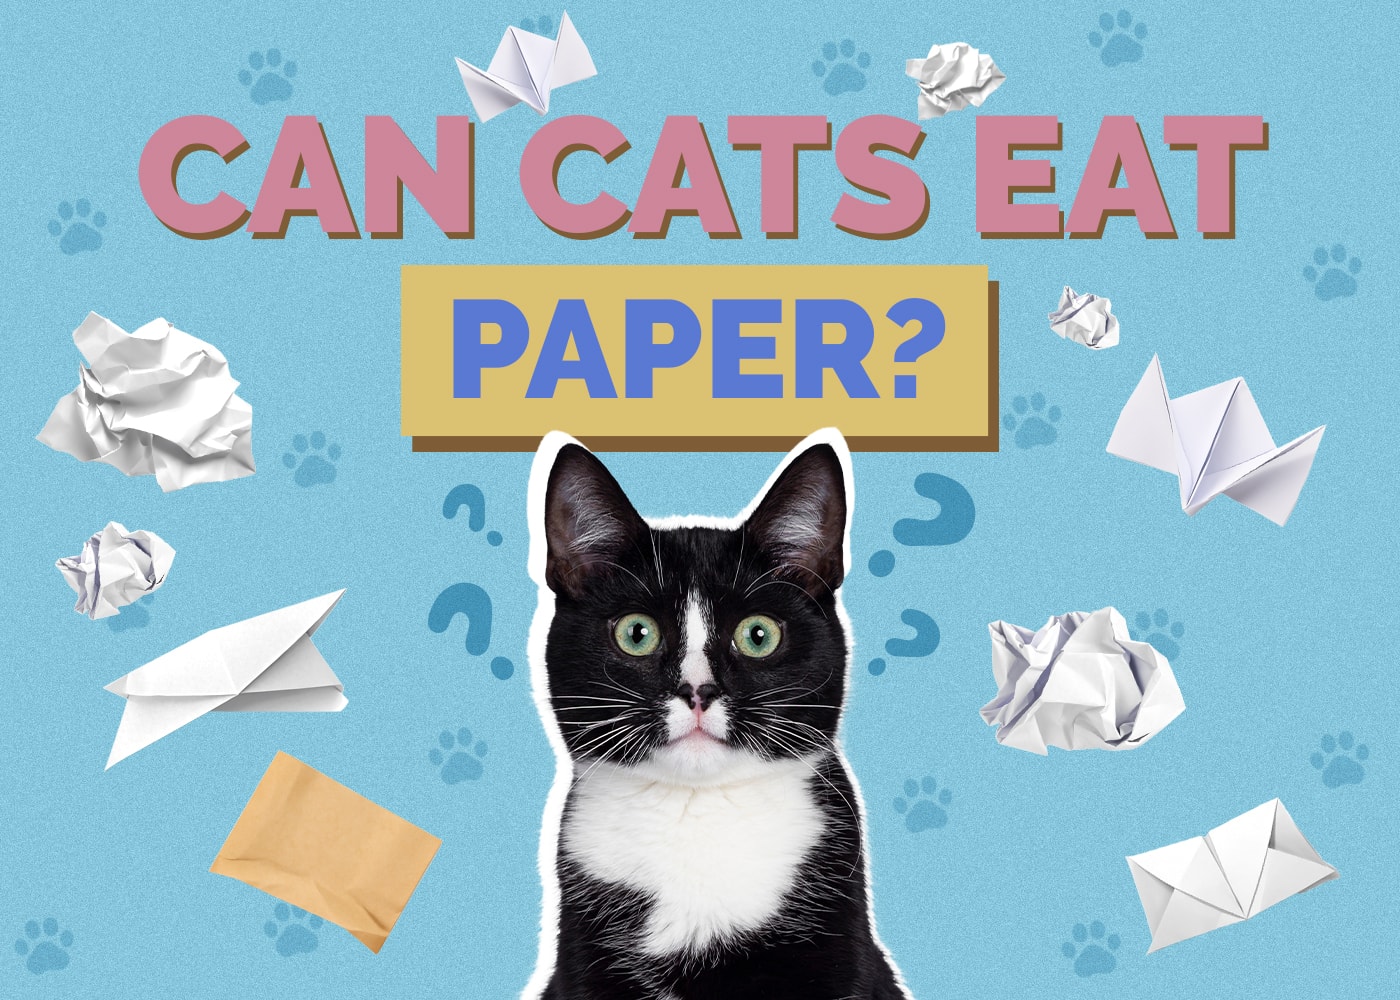 Can Cats Eat paper